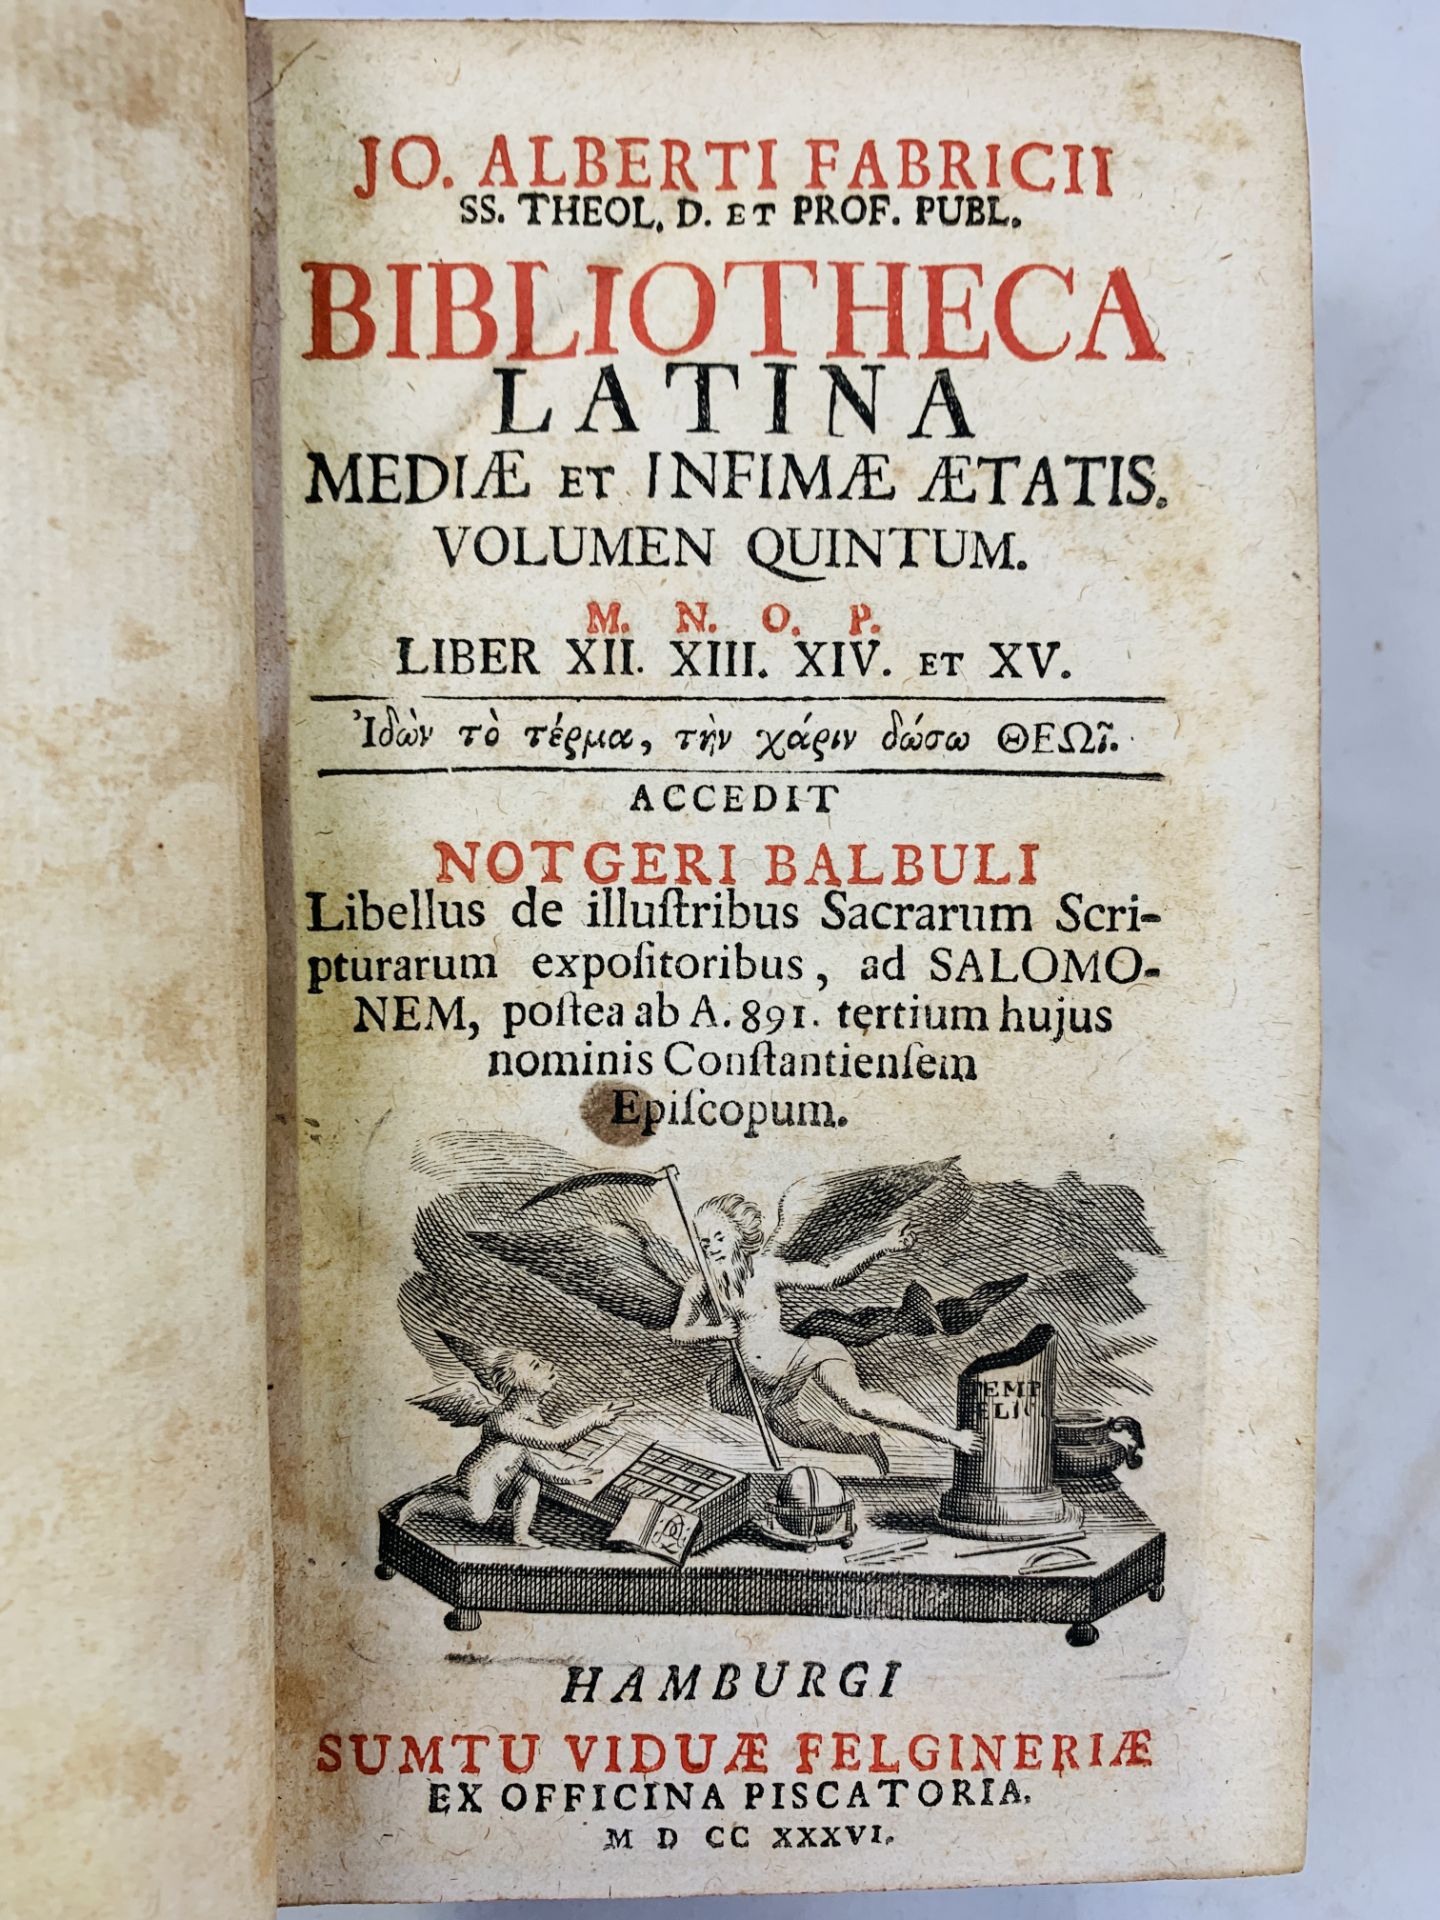 Four volumes of Bibliotheca Latina published in Hamburg 1734-1736 by J. Alberti Fabricii - Image 3 of 4